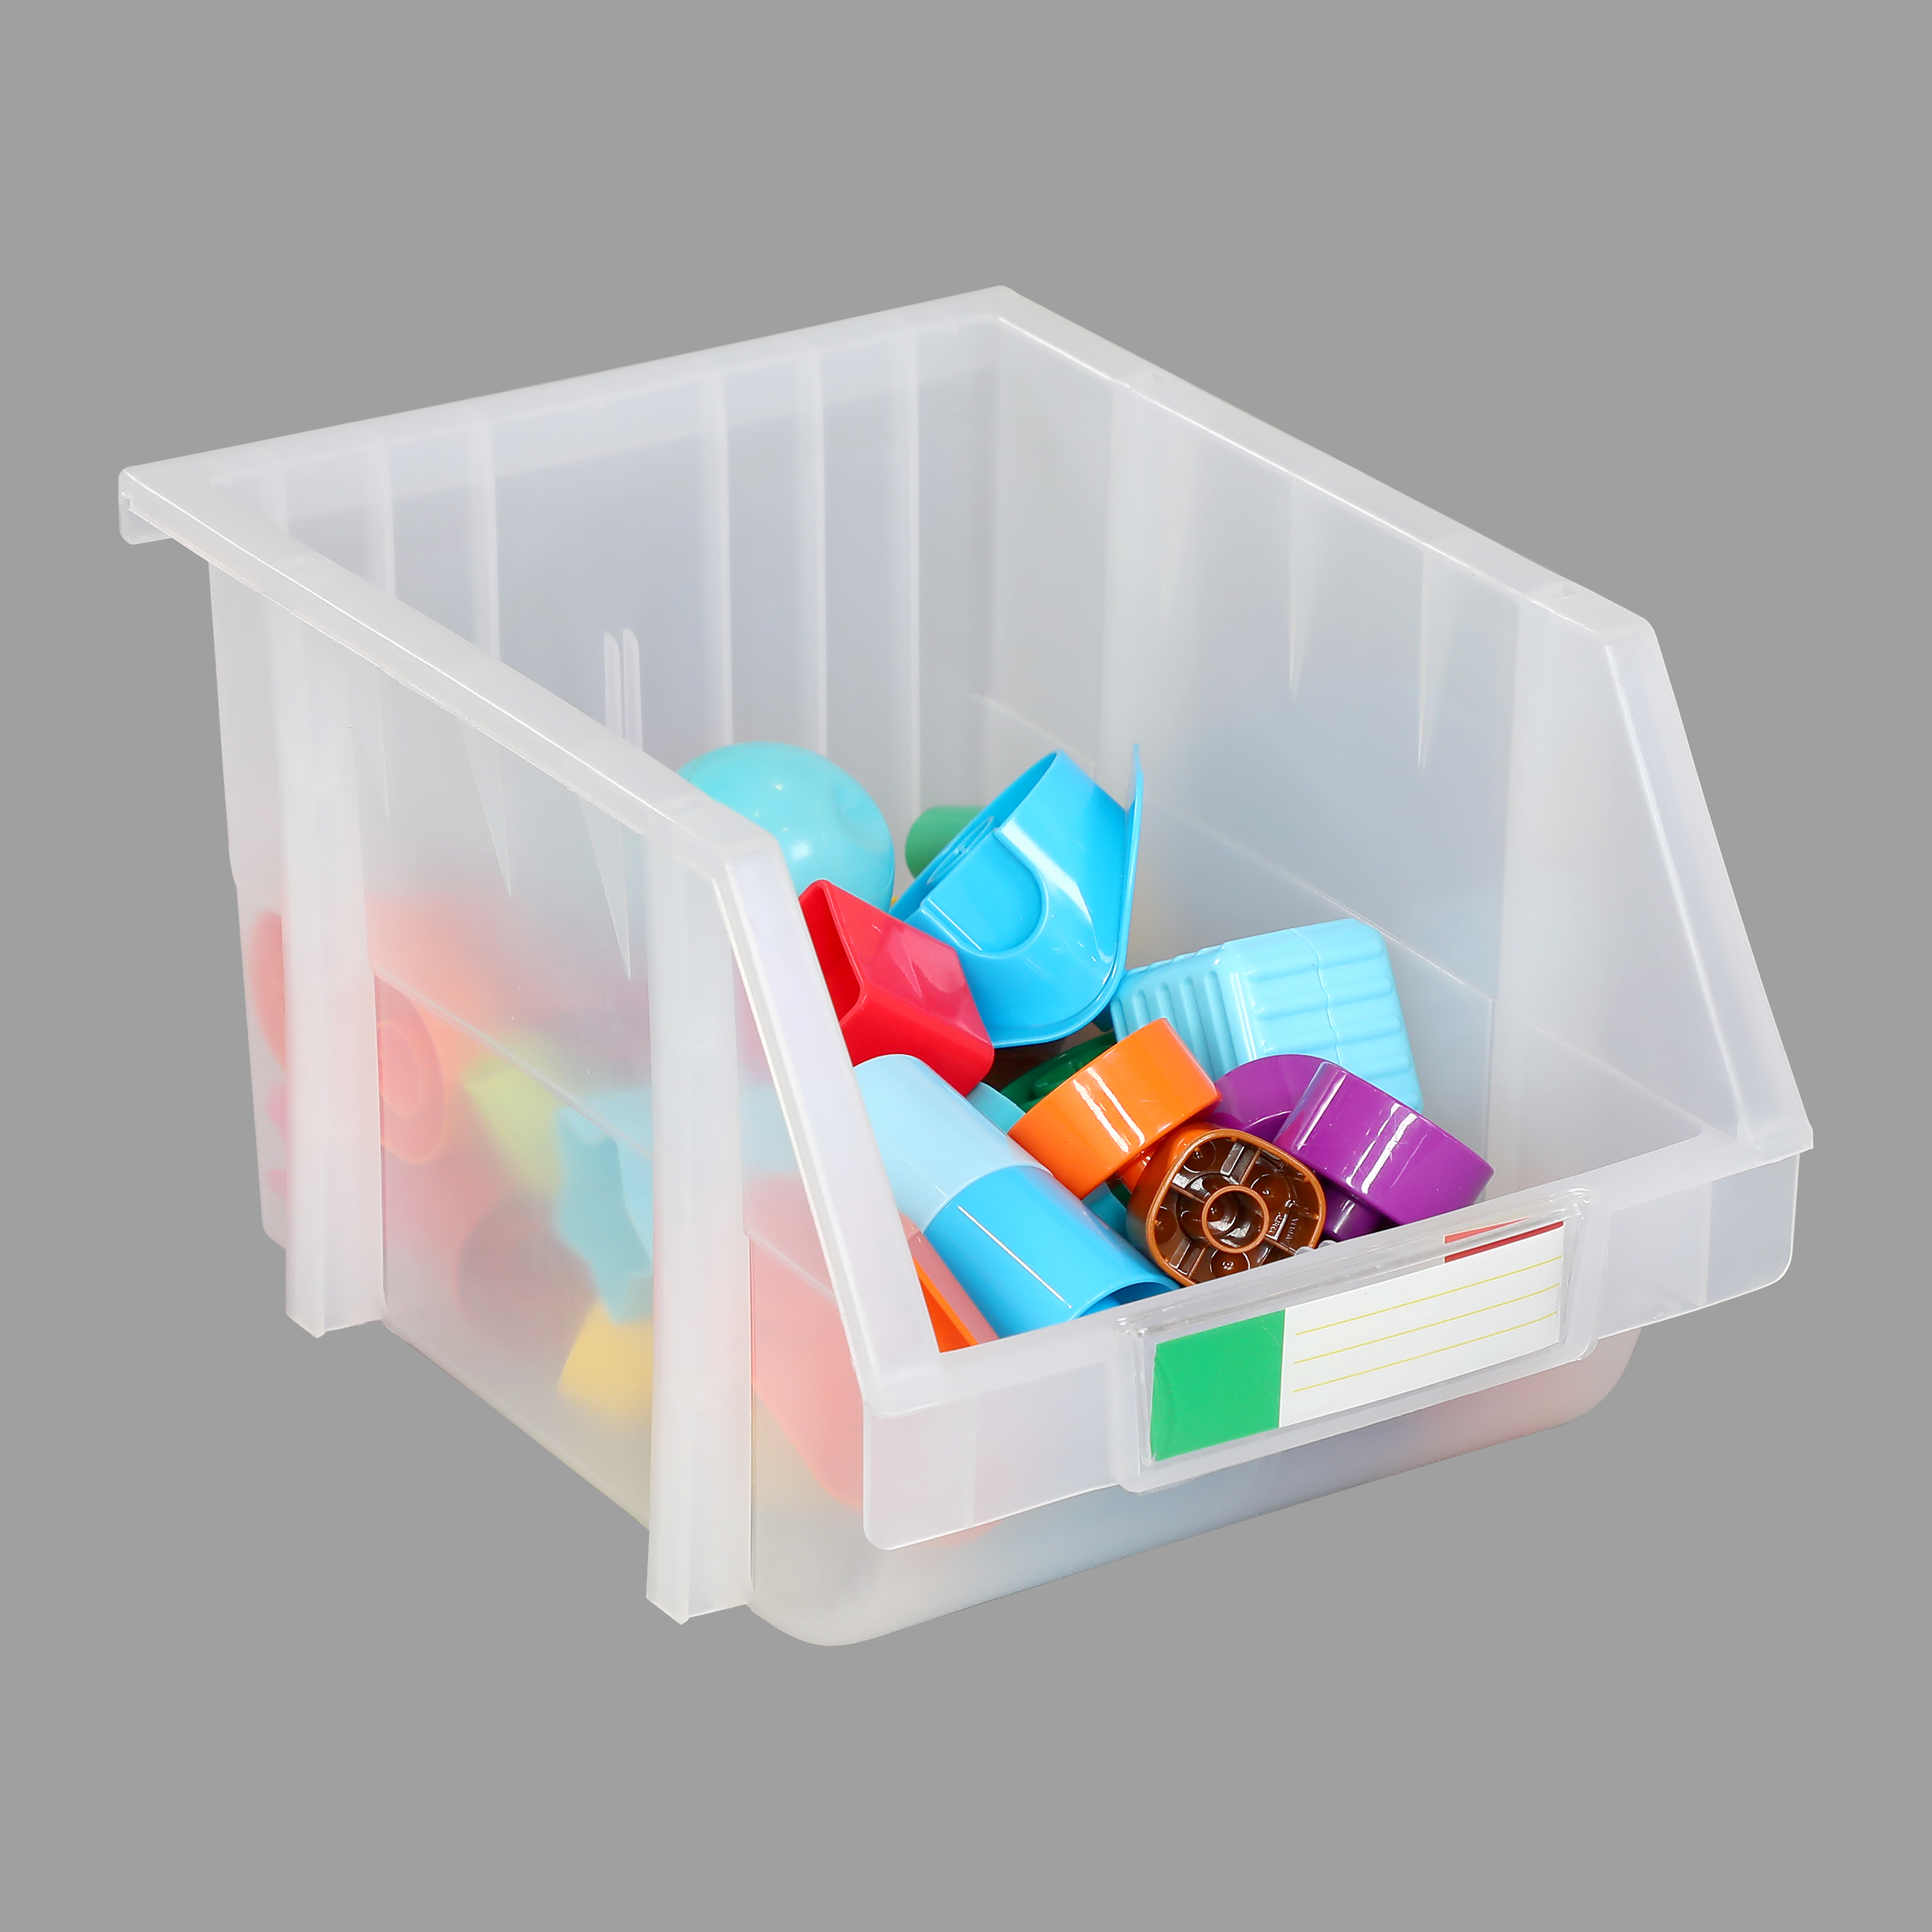 What to Store in the Plastic Storage Bins and Boxes?